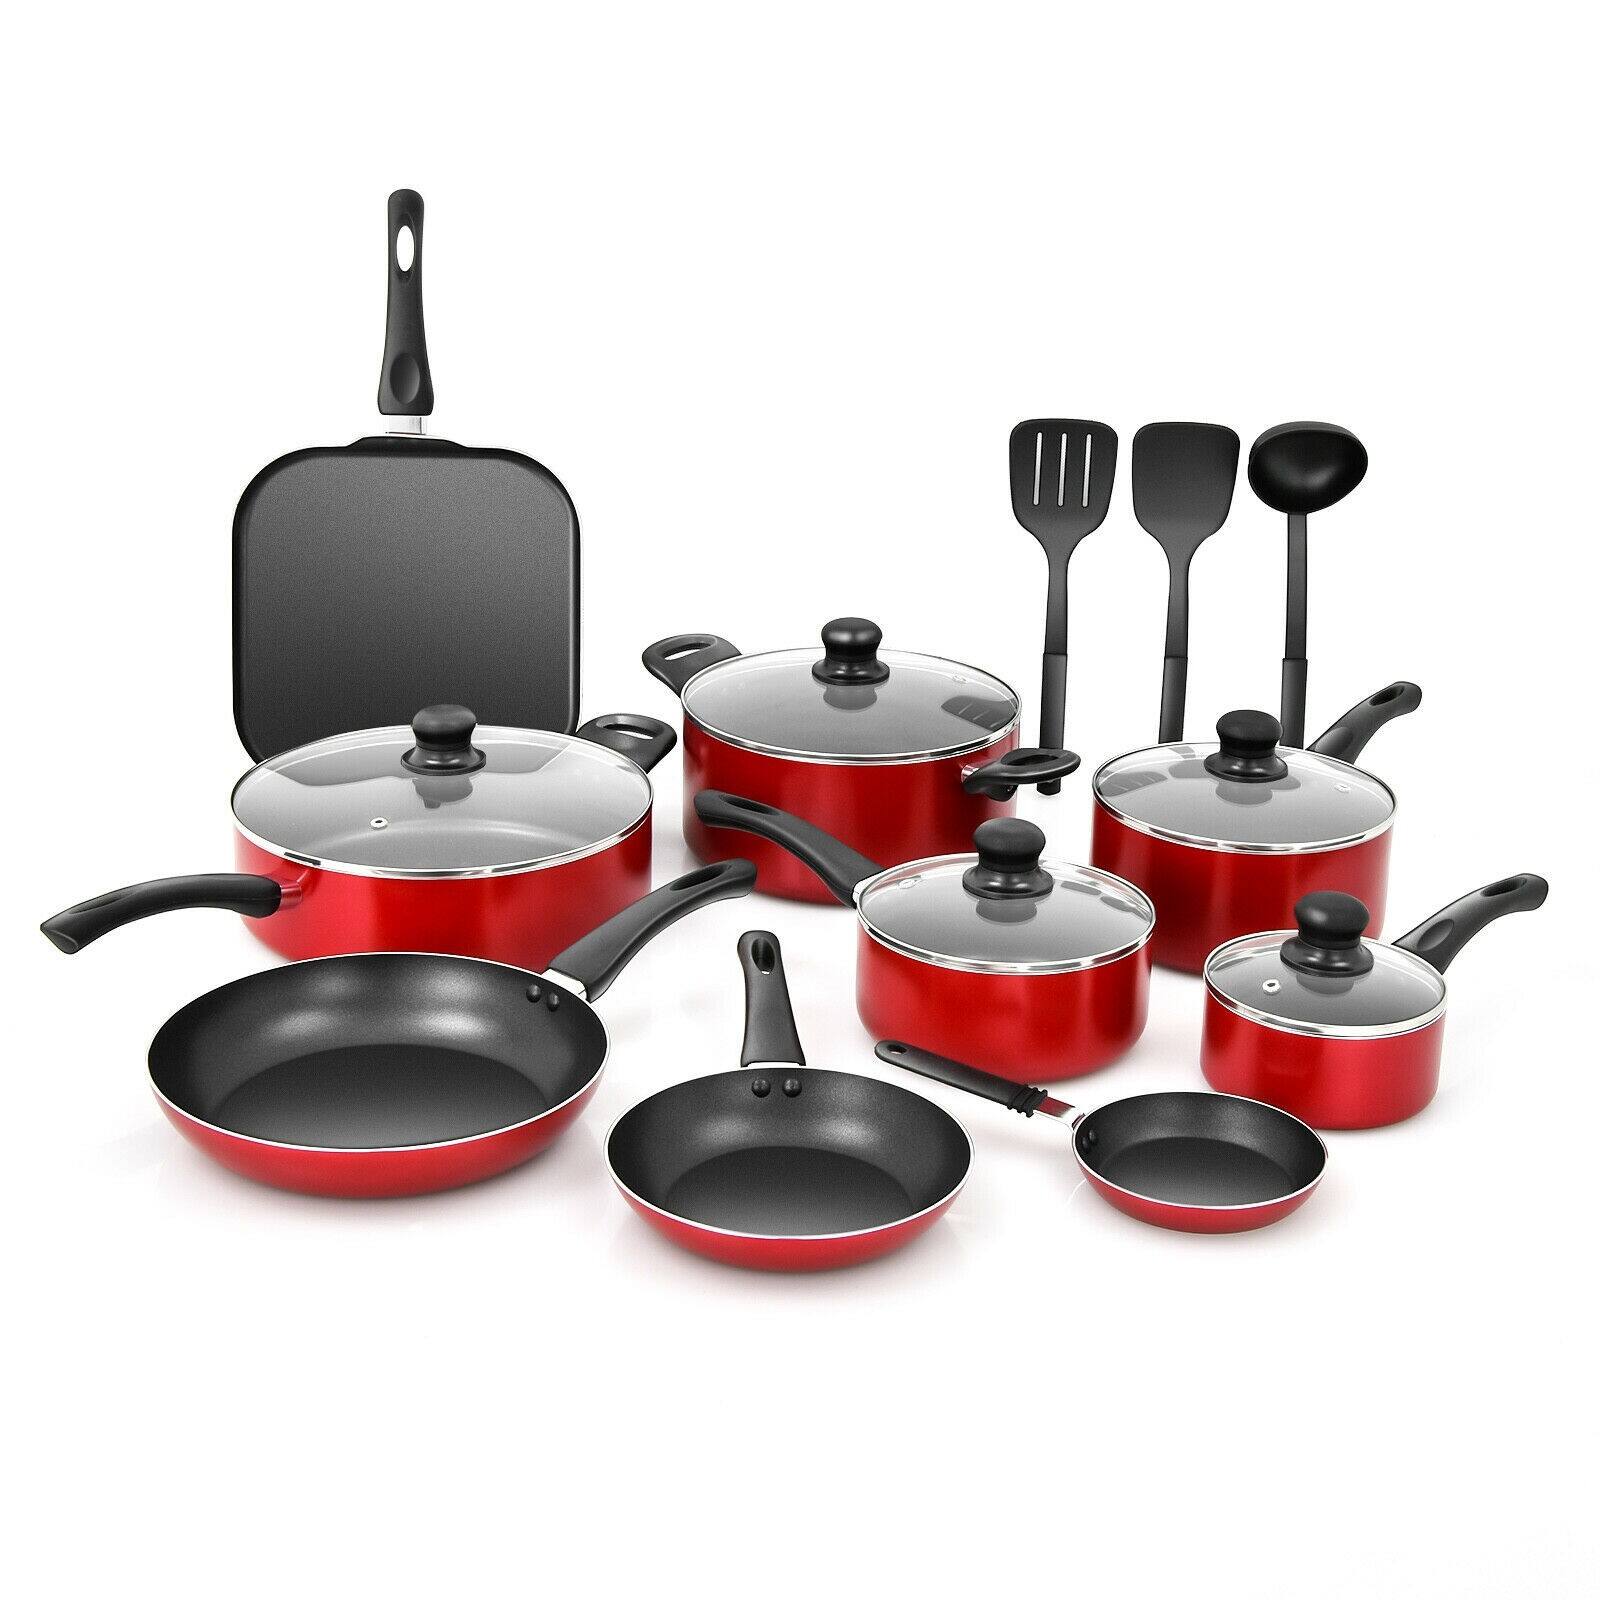 Costway 17 Pieces Hard Anodized Nonstick Cookware Pots and Pans Set $95 + Free Shipping